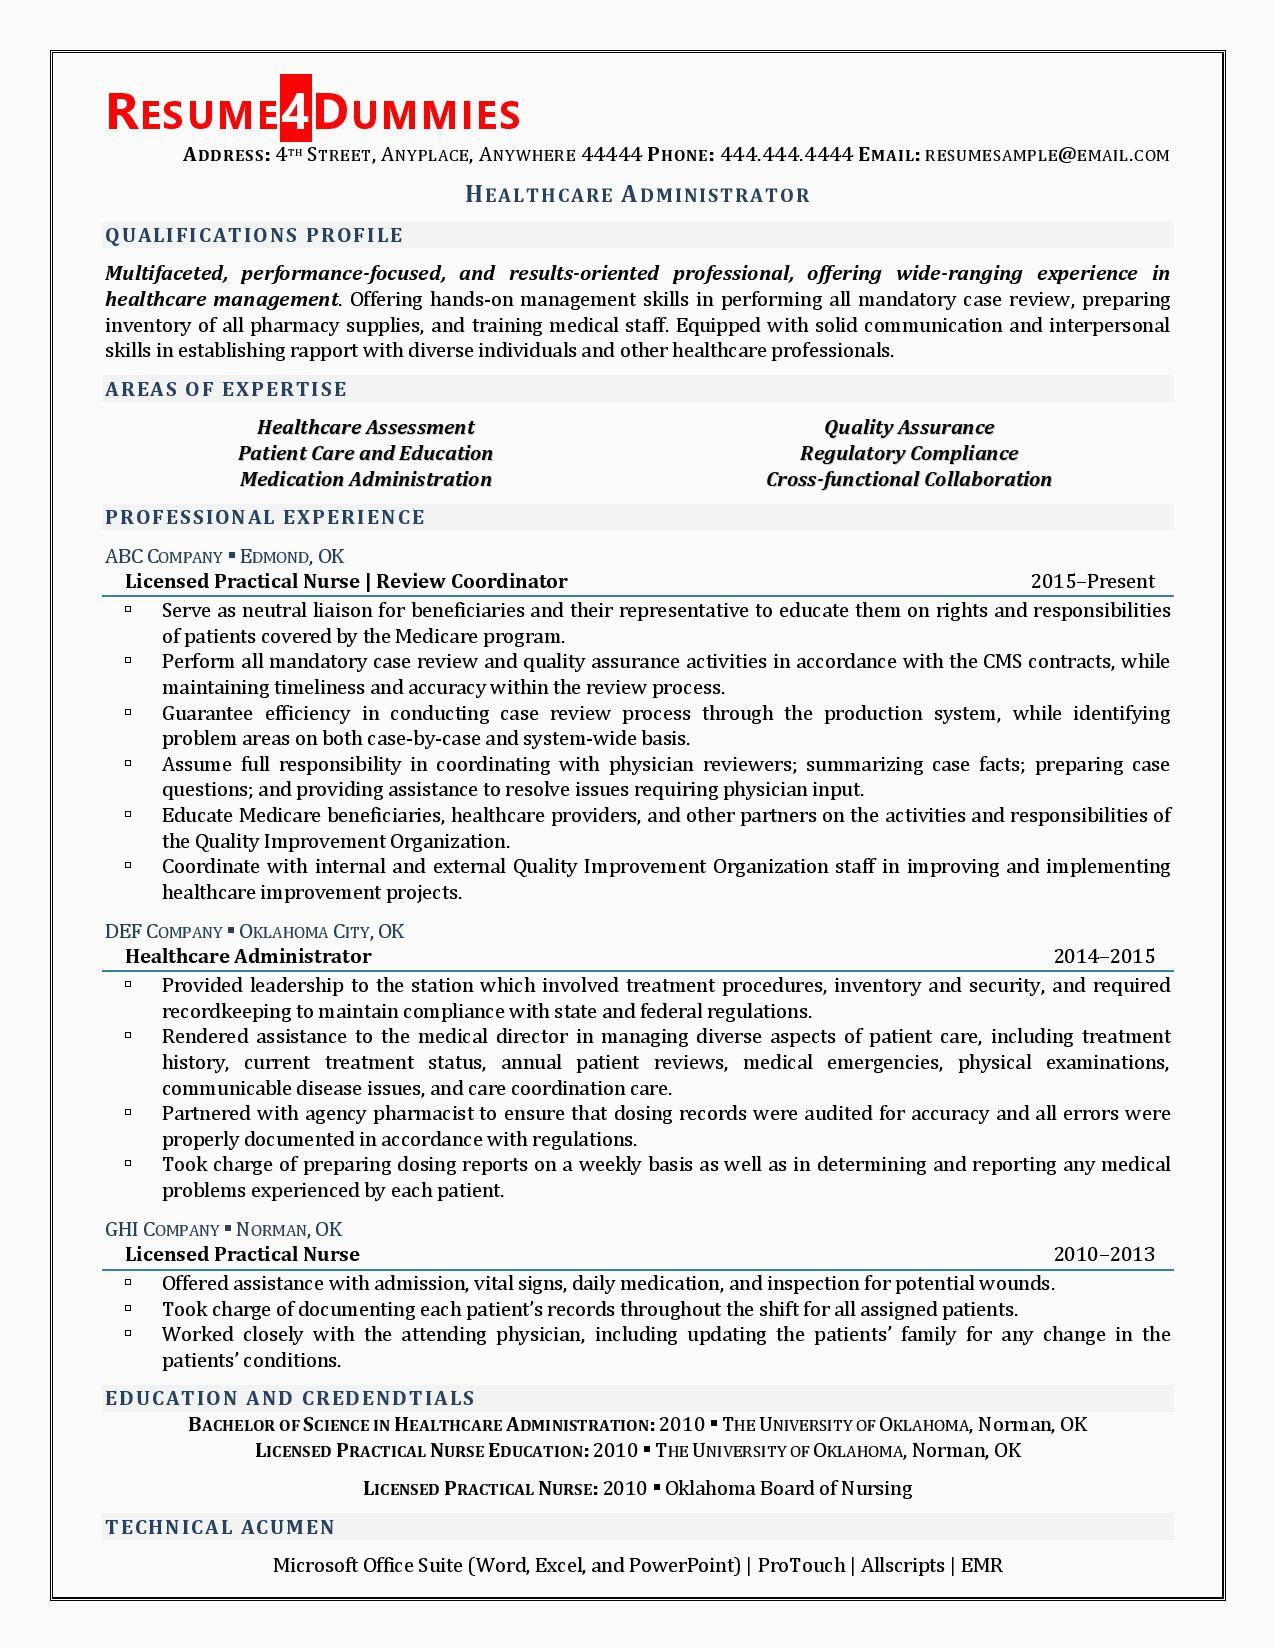 Free Resume Templates for Healthcare Administration Healthcare Administrator Resume Examples Resume4dummies